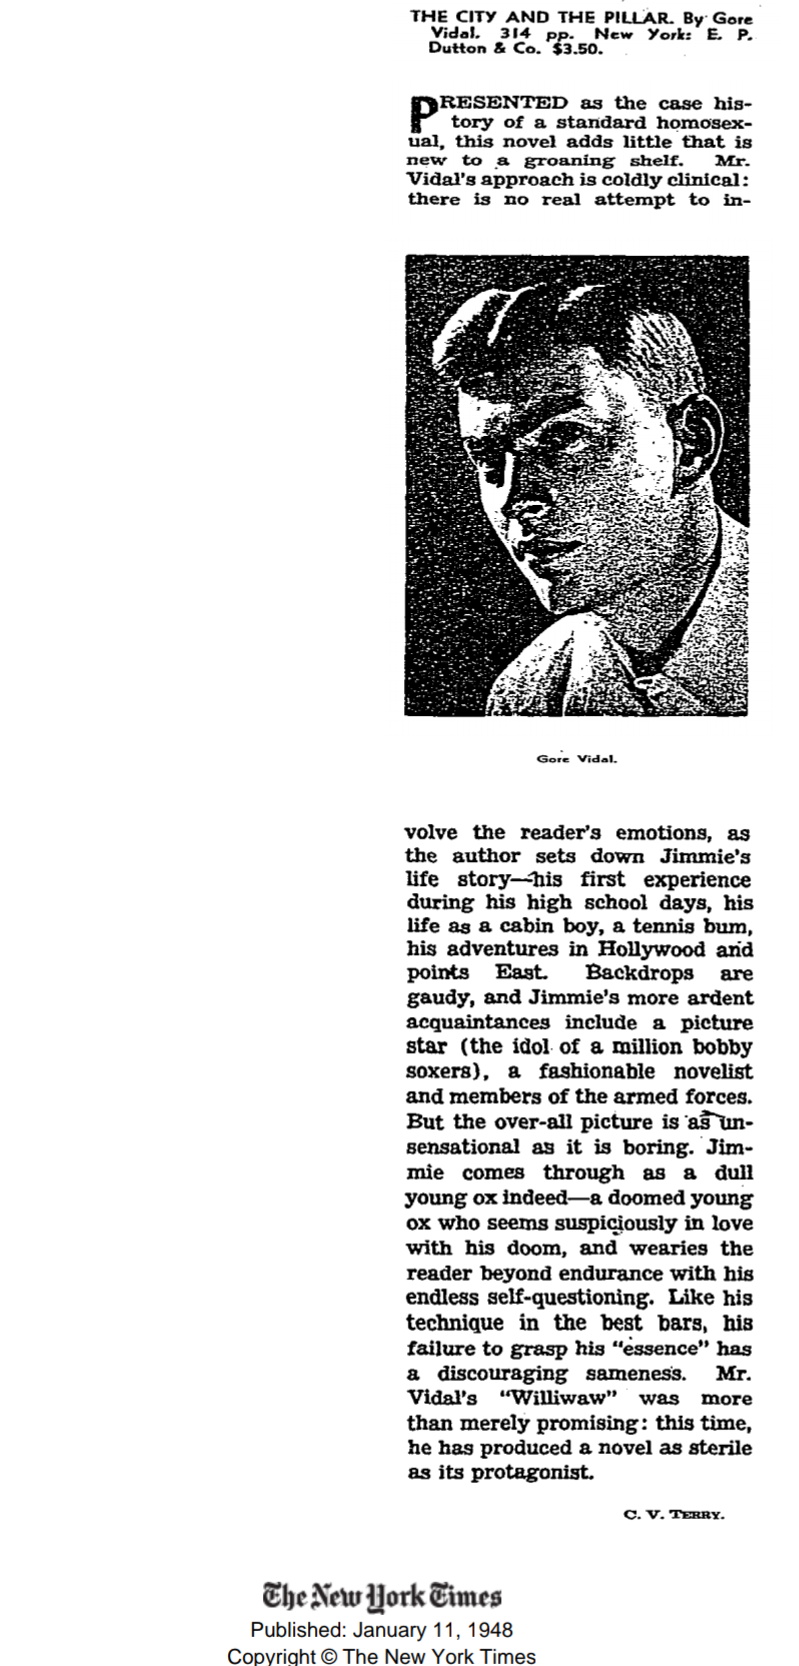 The City and the Pillar, 1948, New York Times Review